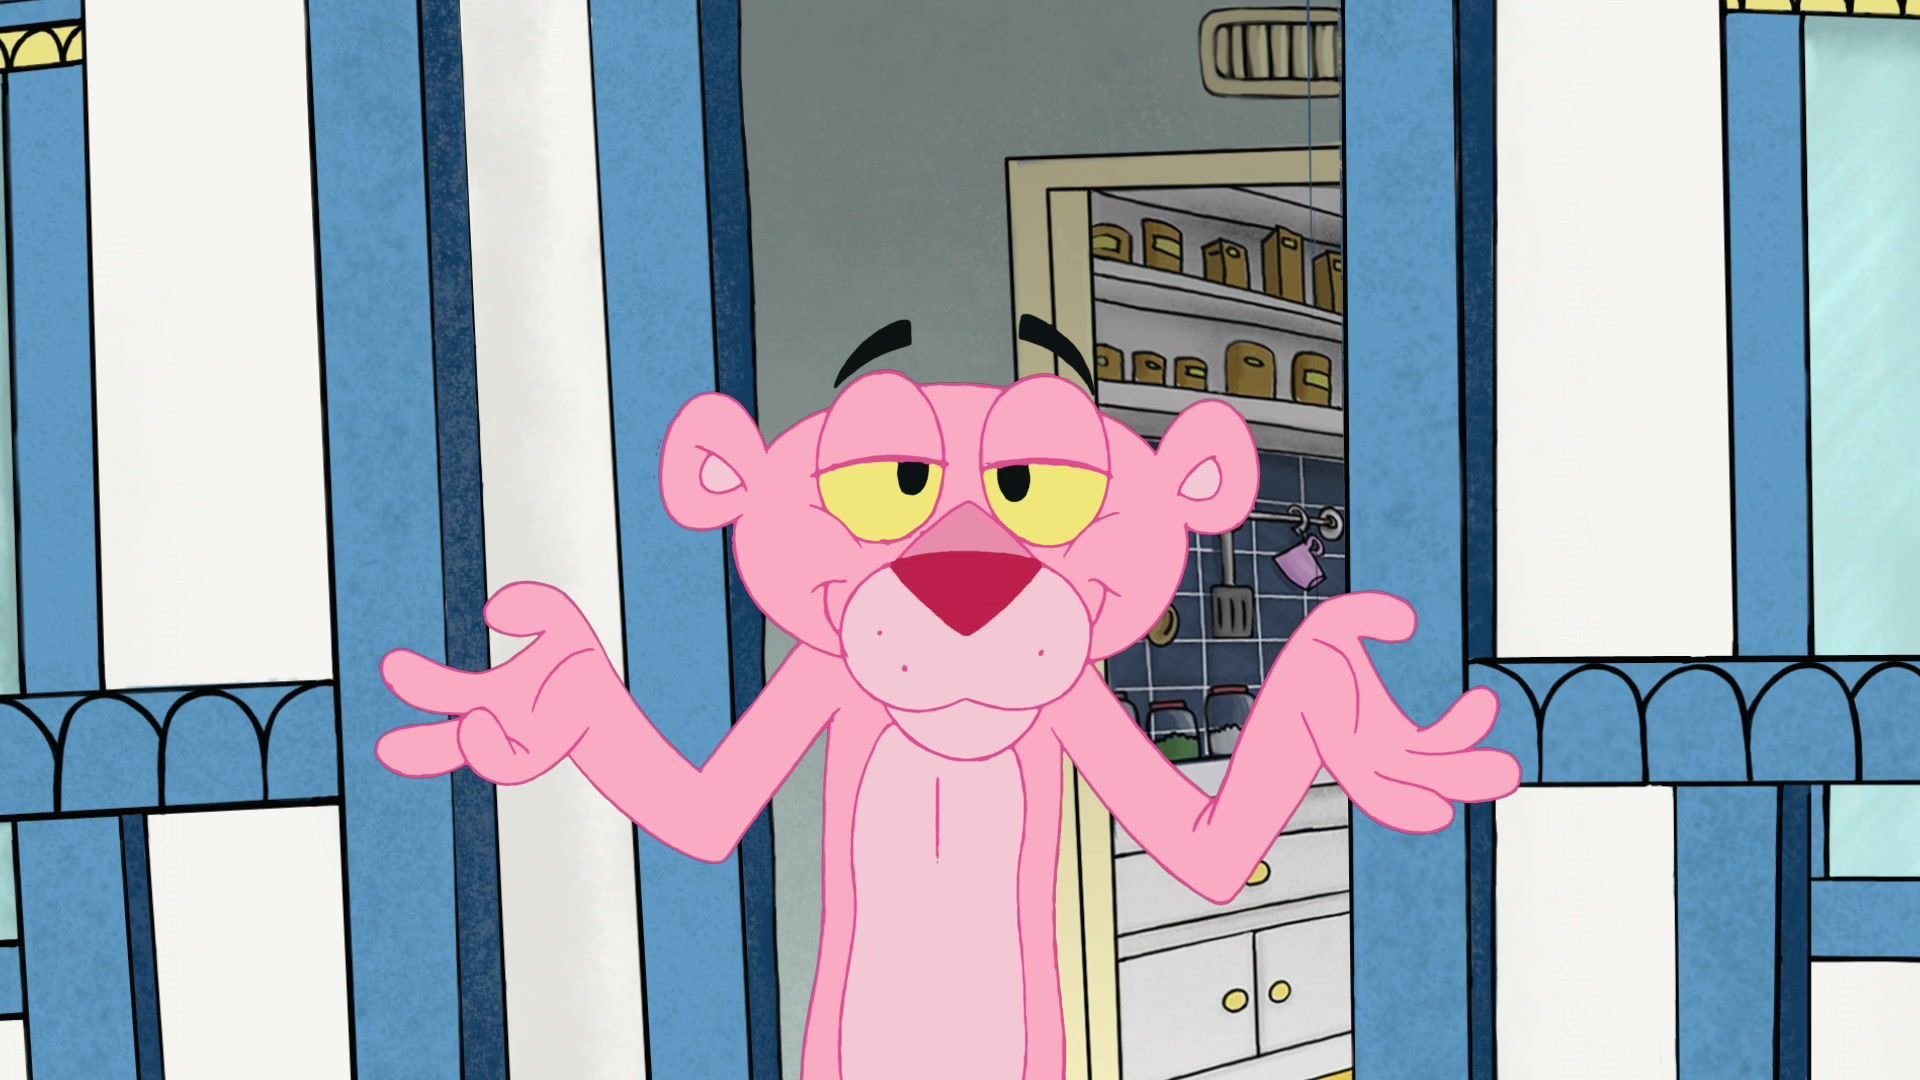 The Pink Panther in a room with a blue and white striped wall. - Pink Panther